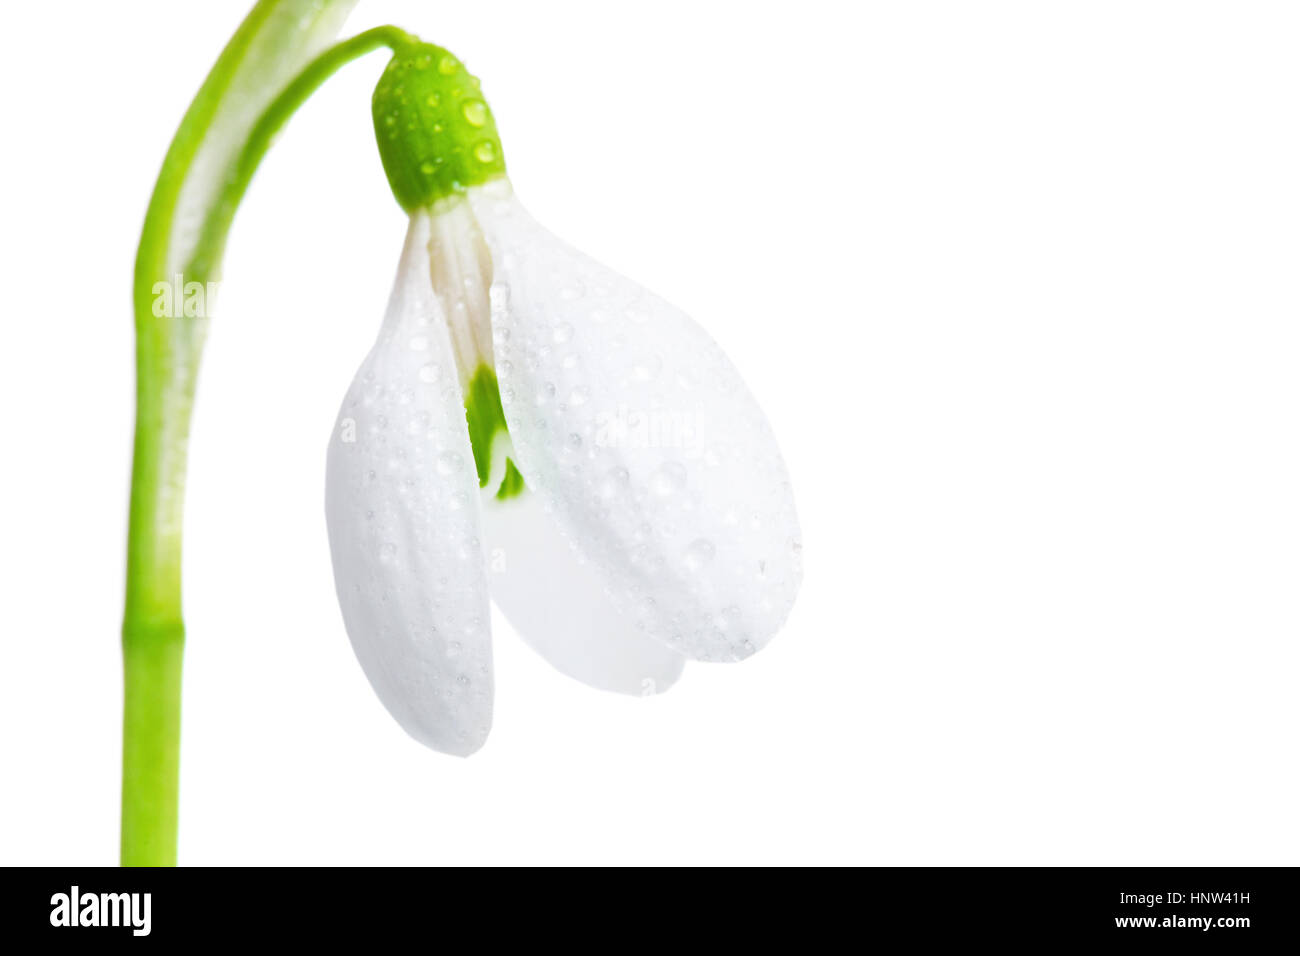 White flower spring snowdrop close-up, isolated on a white background. Stock Photo